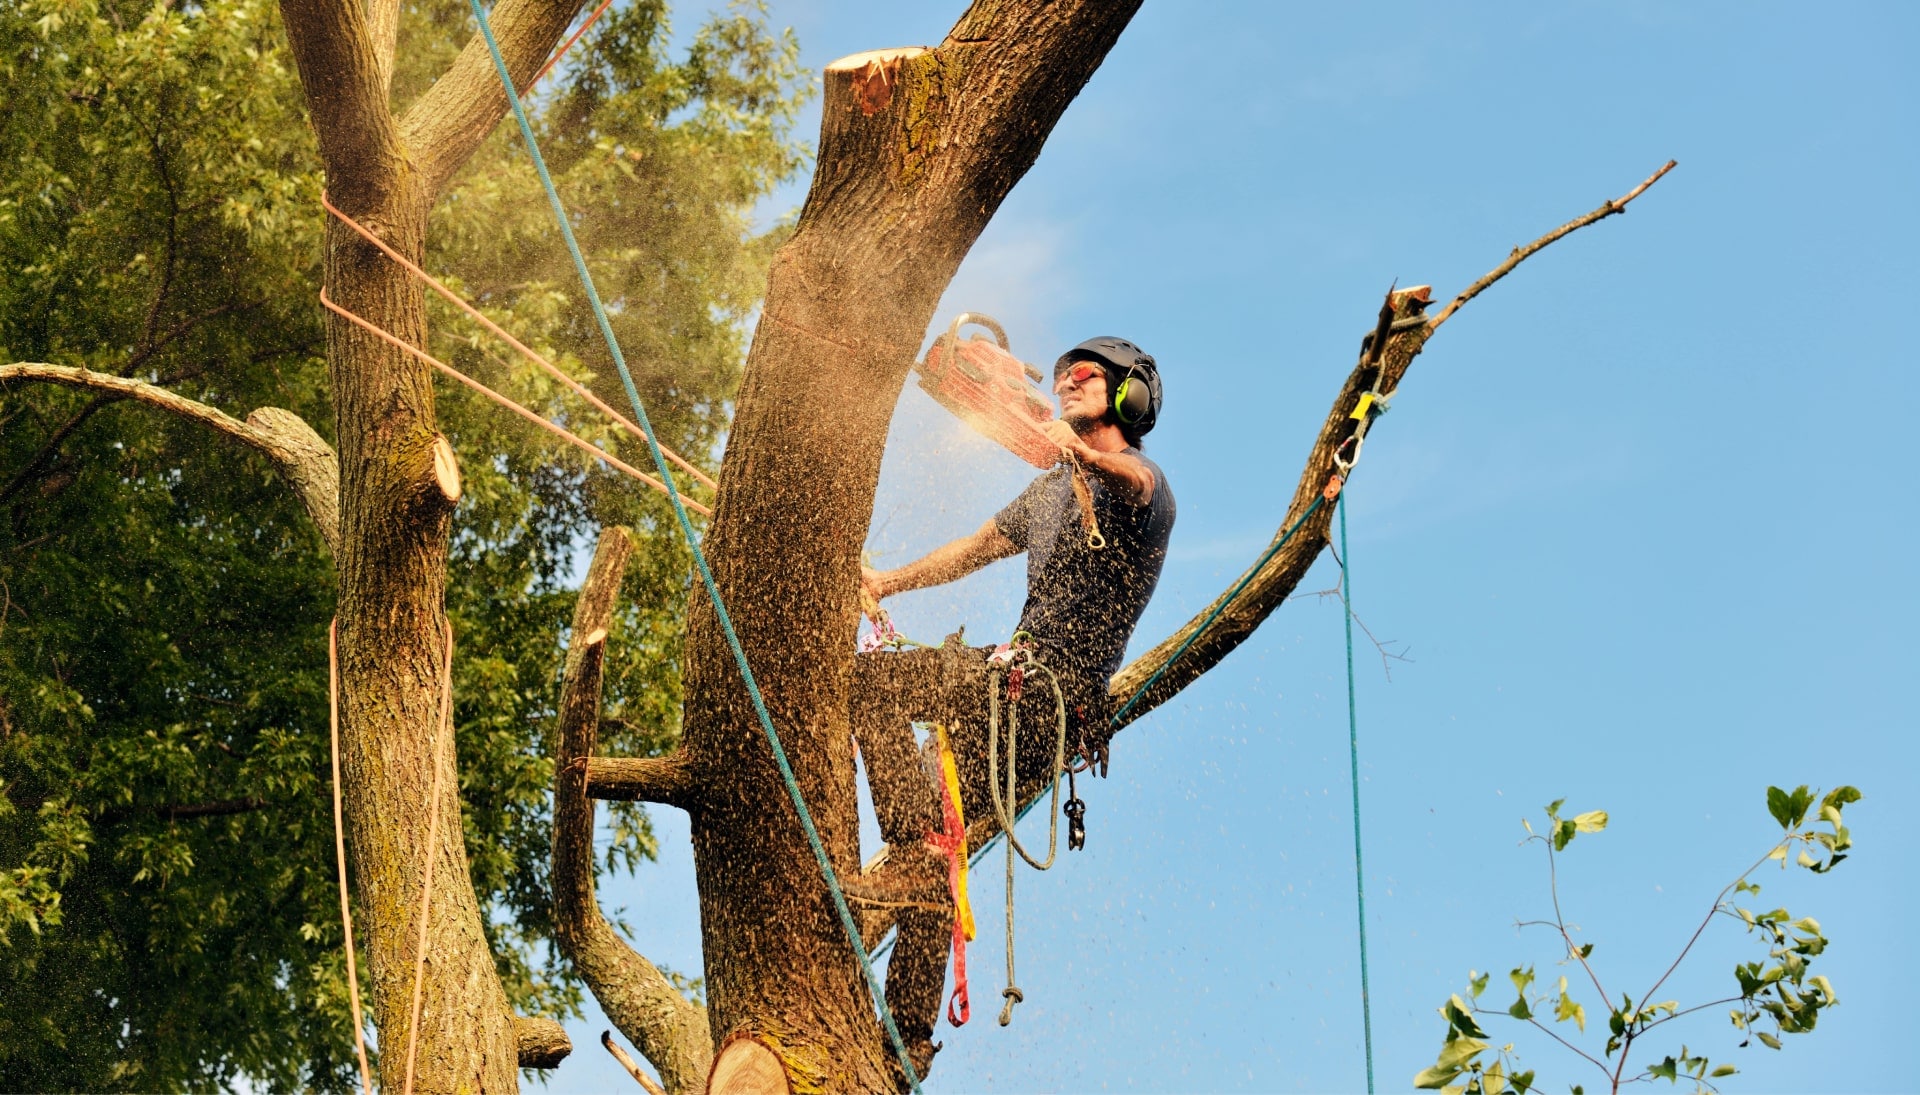 Loveland tree removal experts solve tree issues.